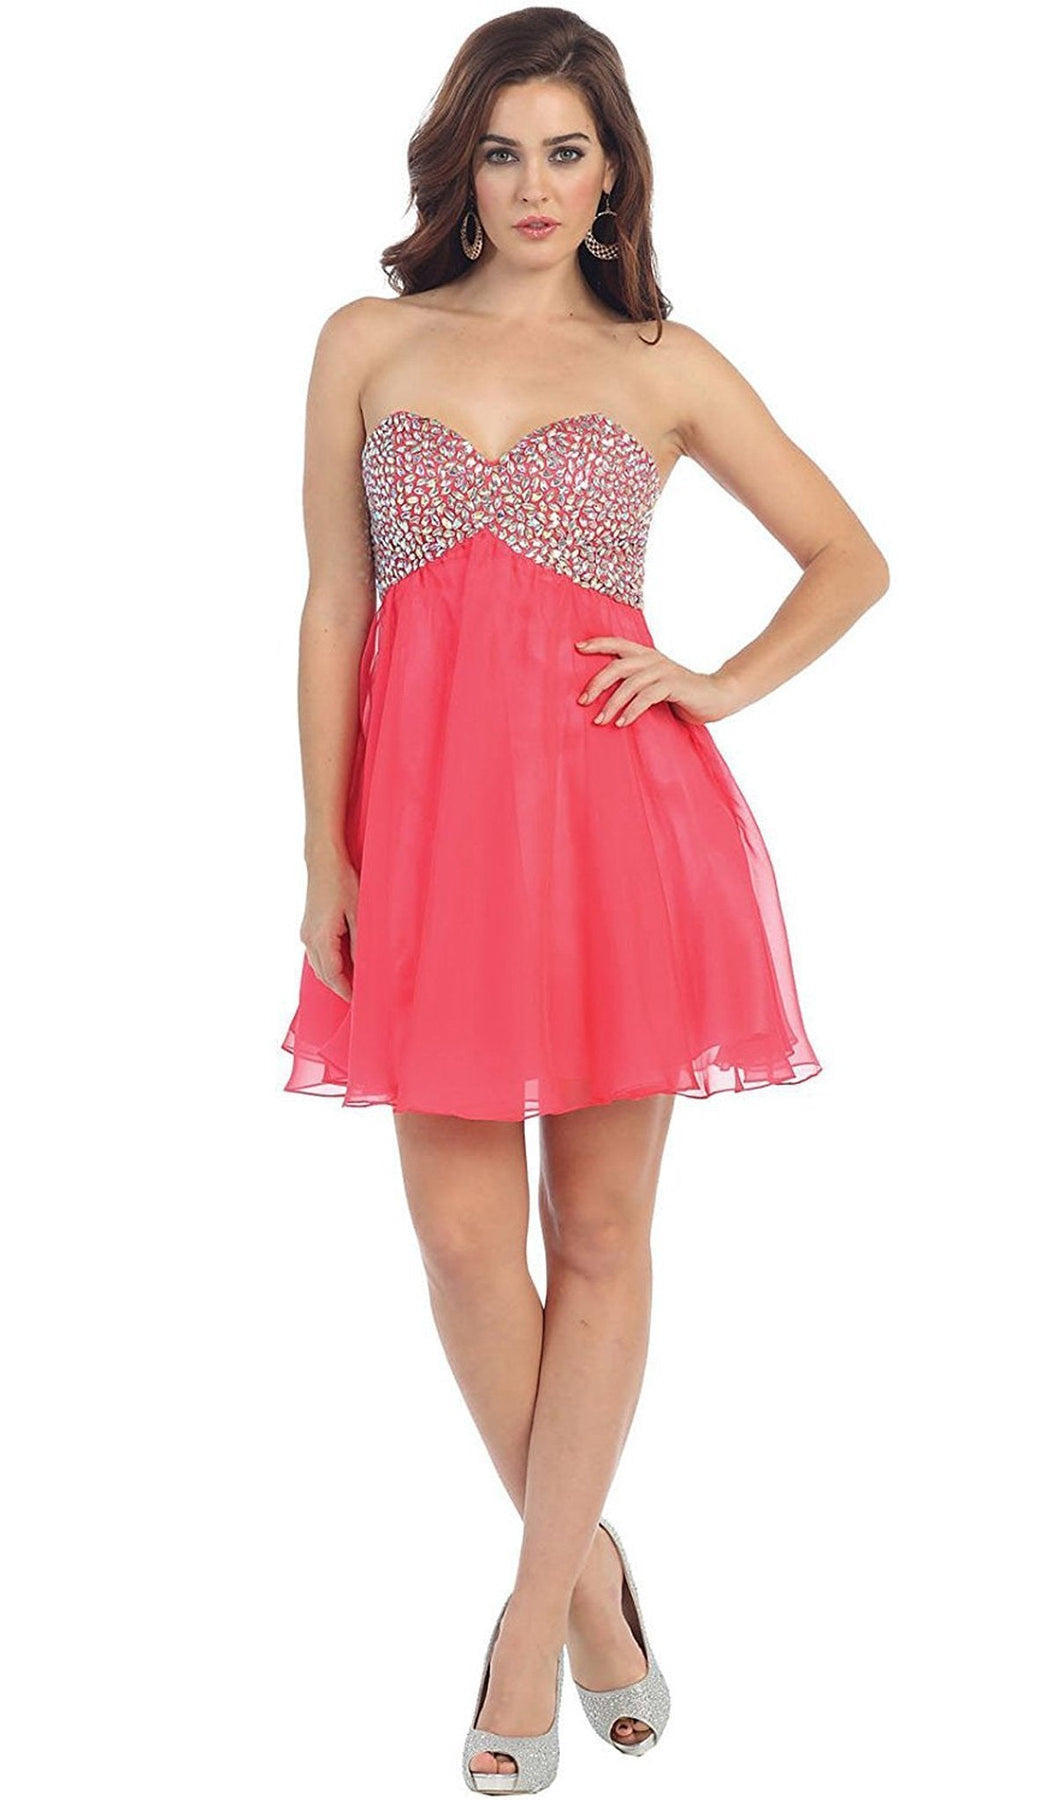 May Queen - Crystal Encrusted Bust Sweetheart Cocktail Dress Special Occasion Dress 4 / Red